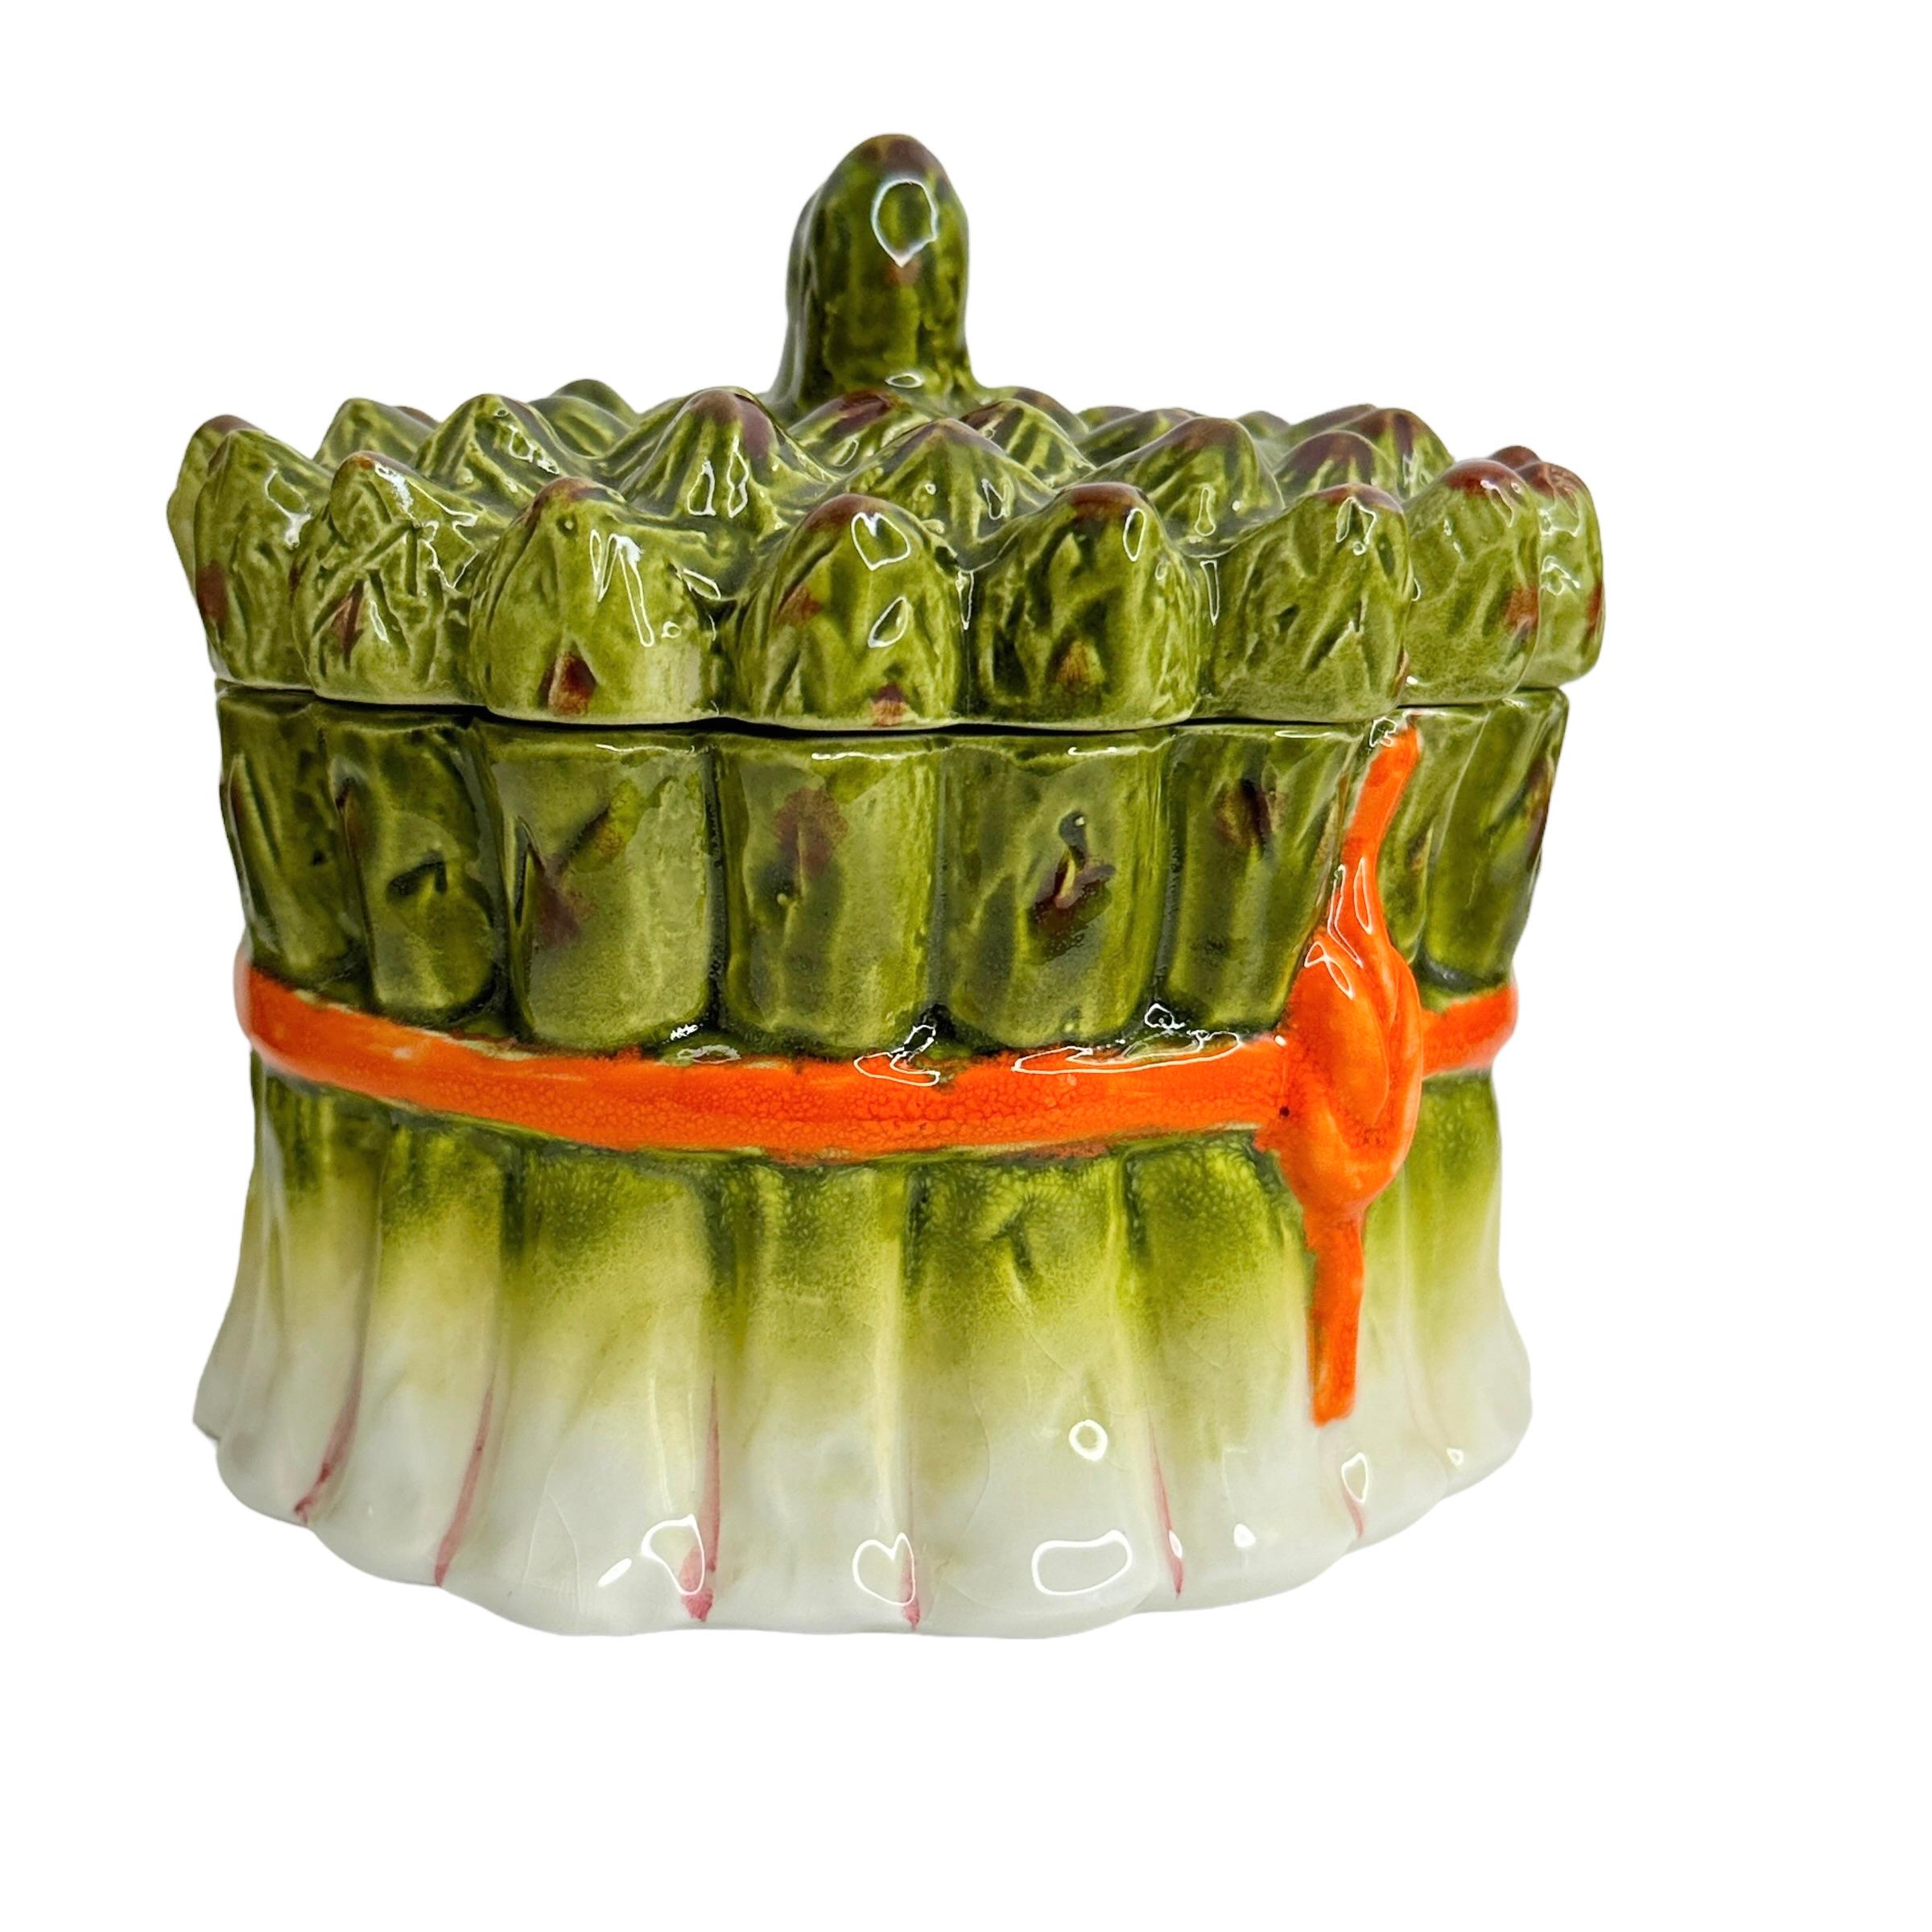 This beautiful porcelain ceramic decorative lidded jar for sauce hollandaise canister is surrounded with cream and green asparagus spears. It was made by hand in the city of Basano, Italy. It is similar in design to the pieces designed by Ed